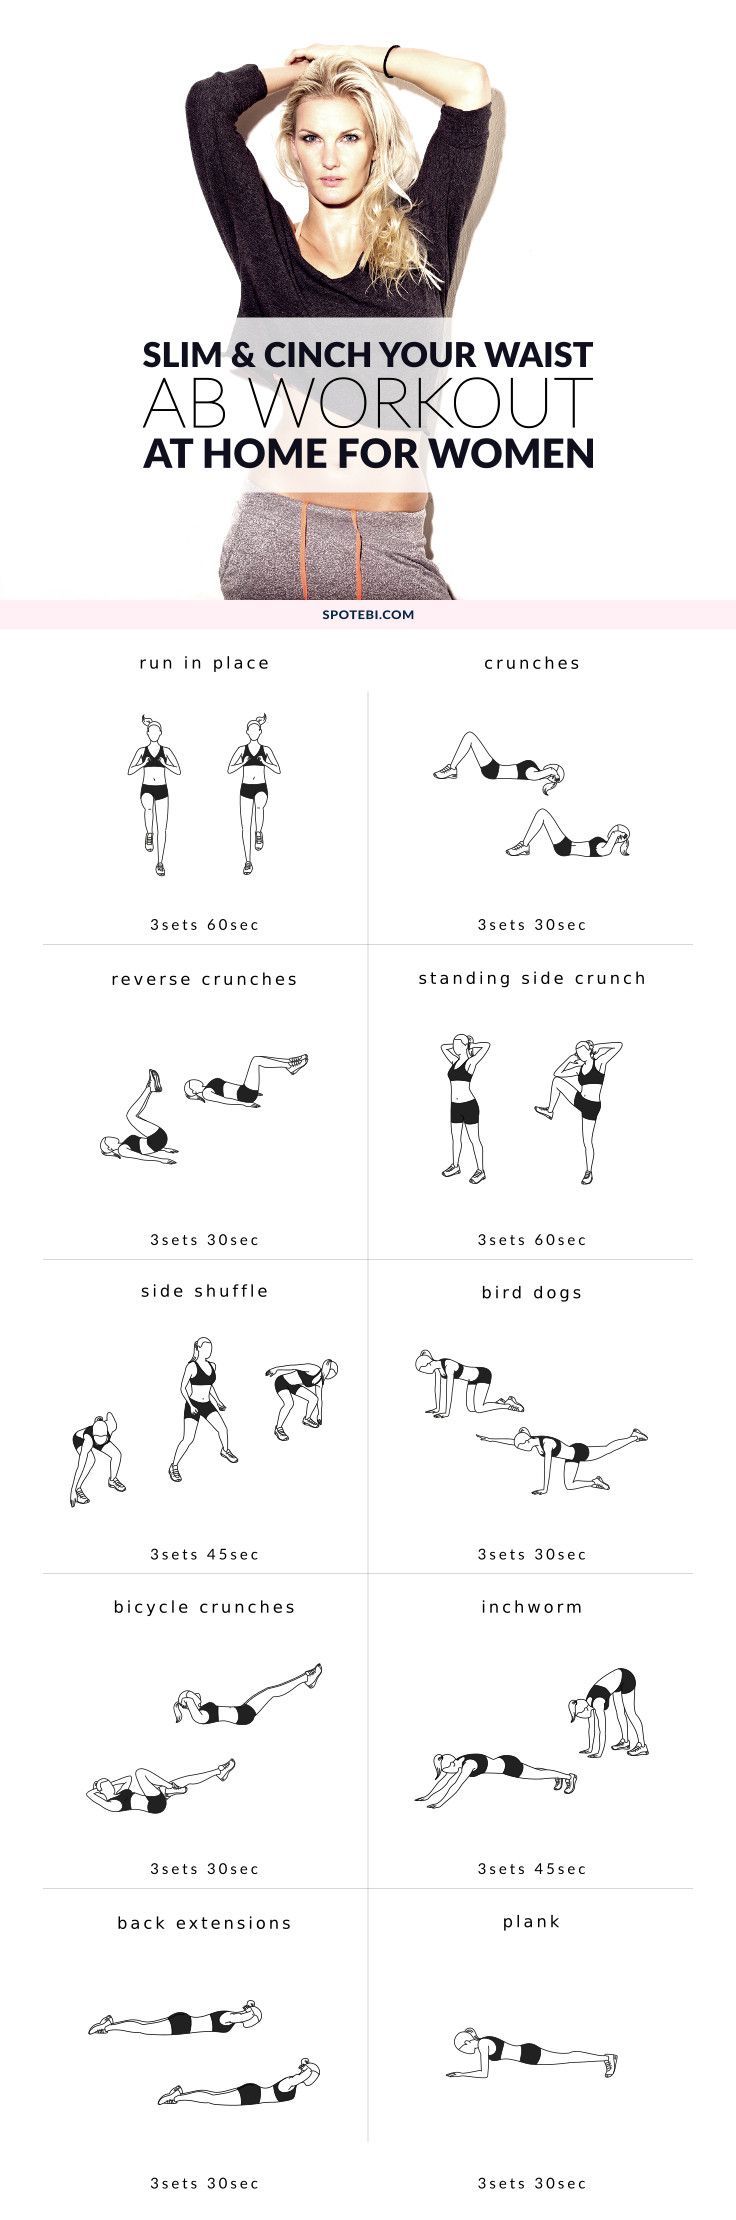 Challenge your midsection with this beginner ab workout for women. A complete core and cardio routine designed to trim and sculpt